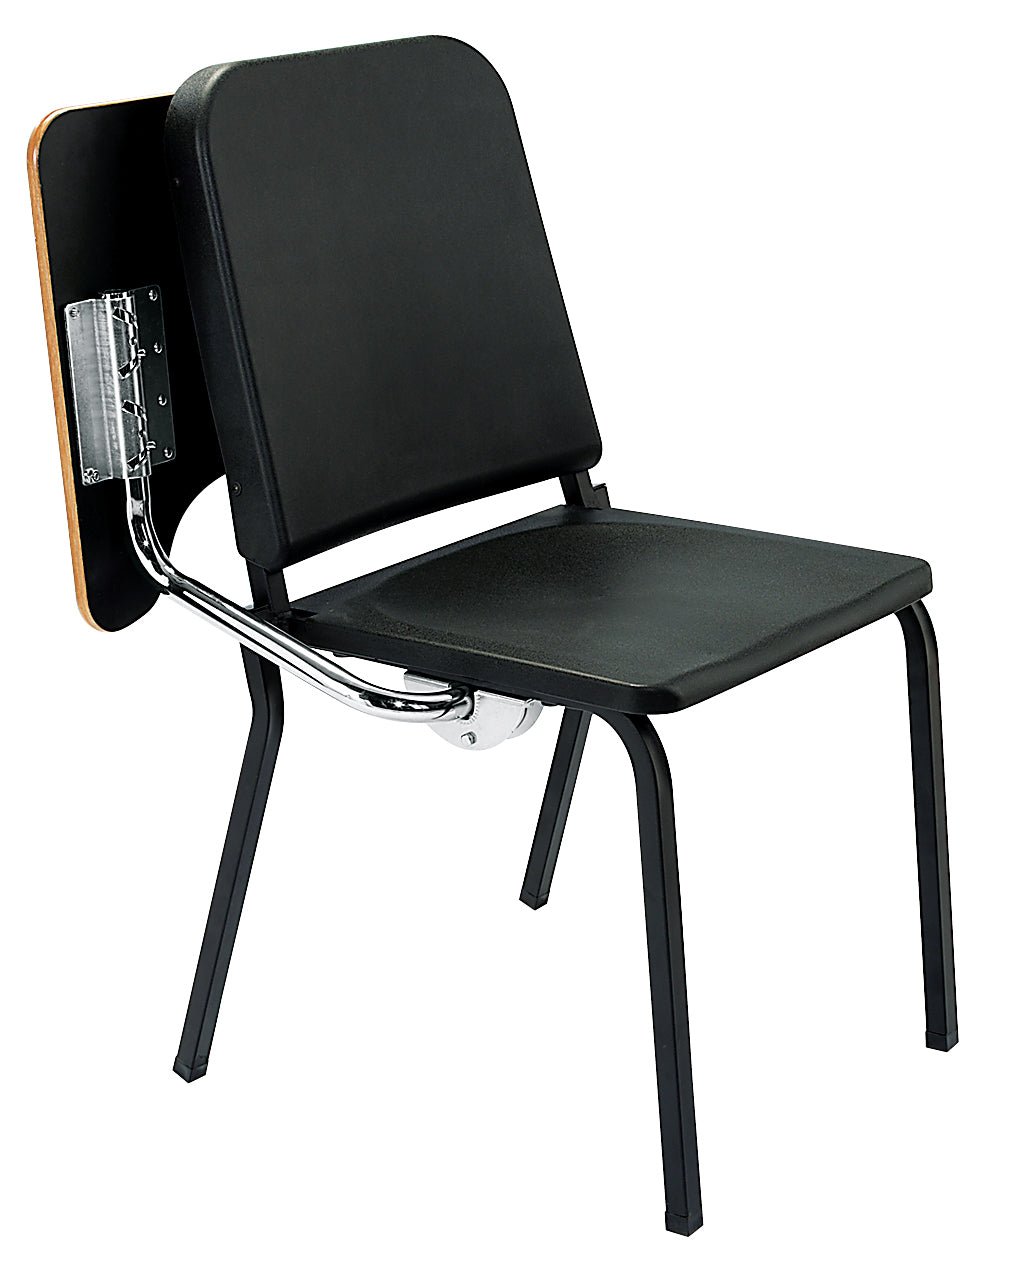 NPS Gray Removable Tablet Arm for 8200 Series Stack Chair - Right Hand (National Public Seating NPS-TA82R) - SchoolOutlet